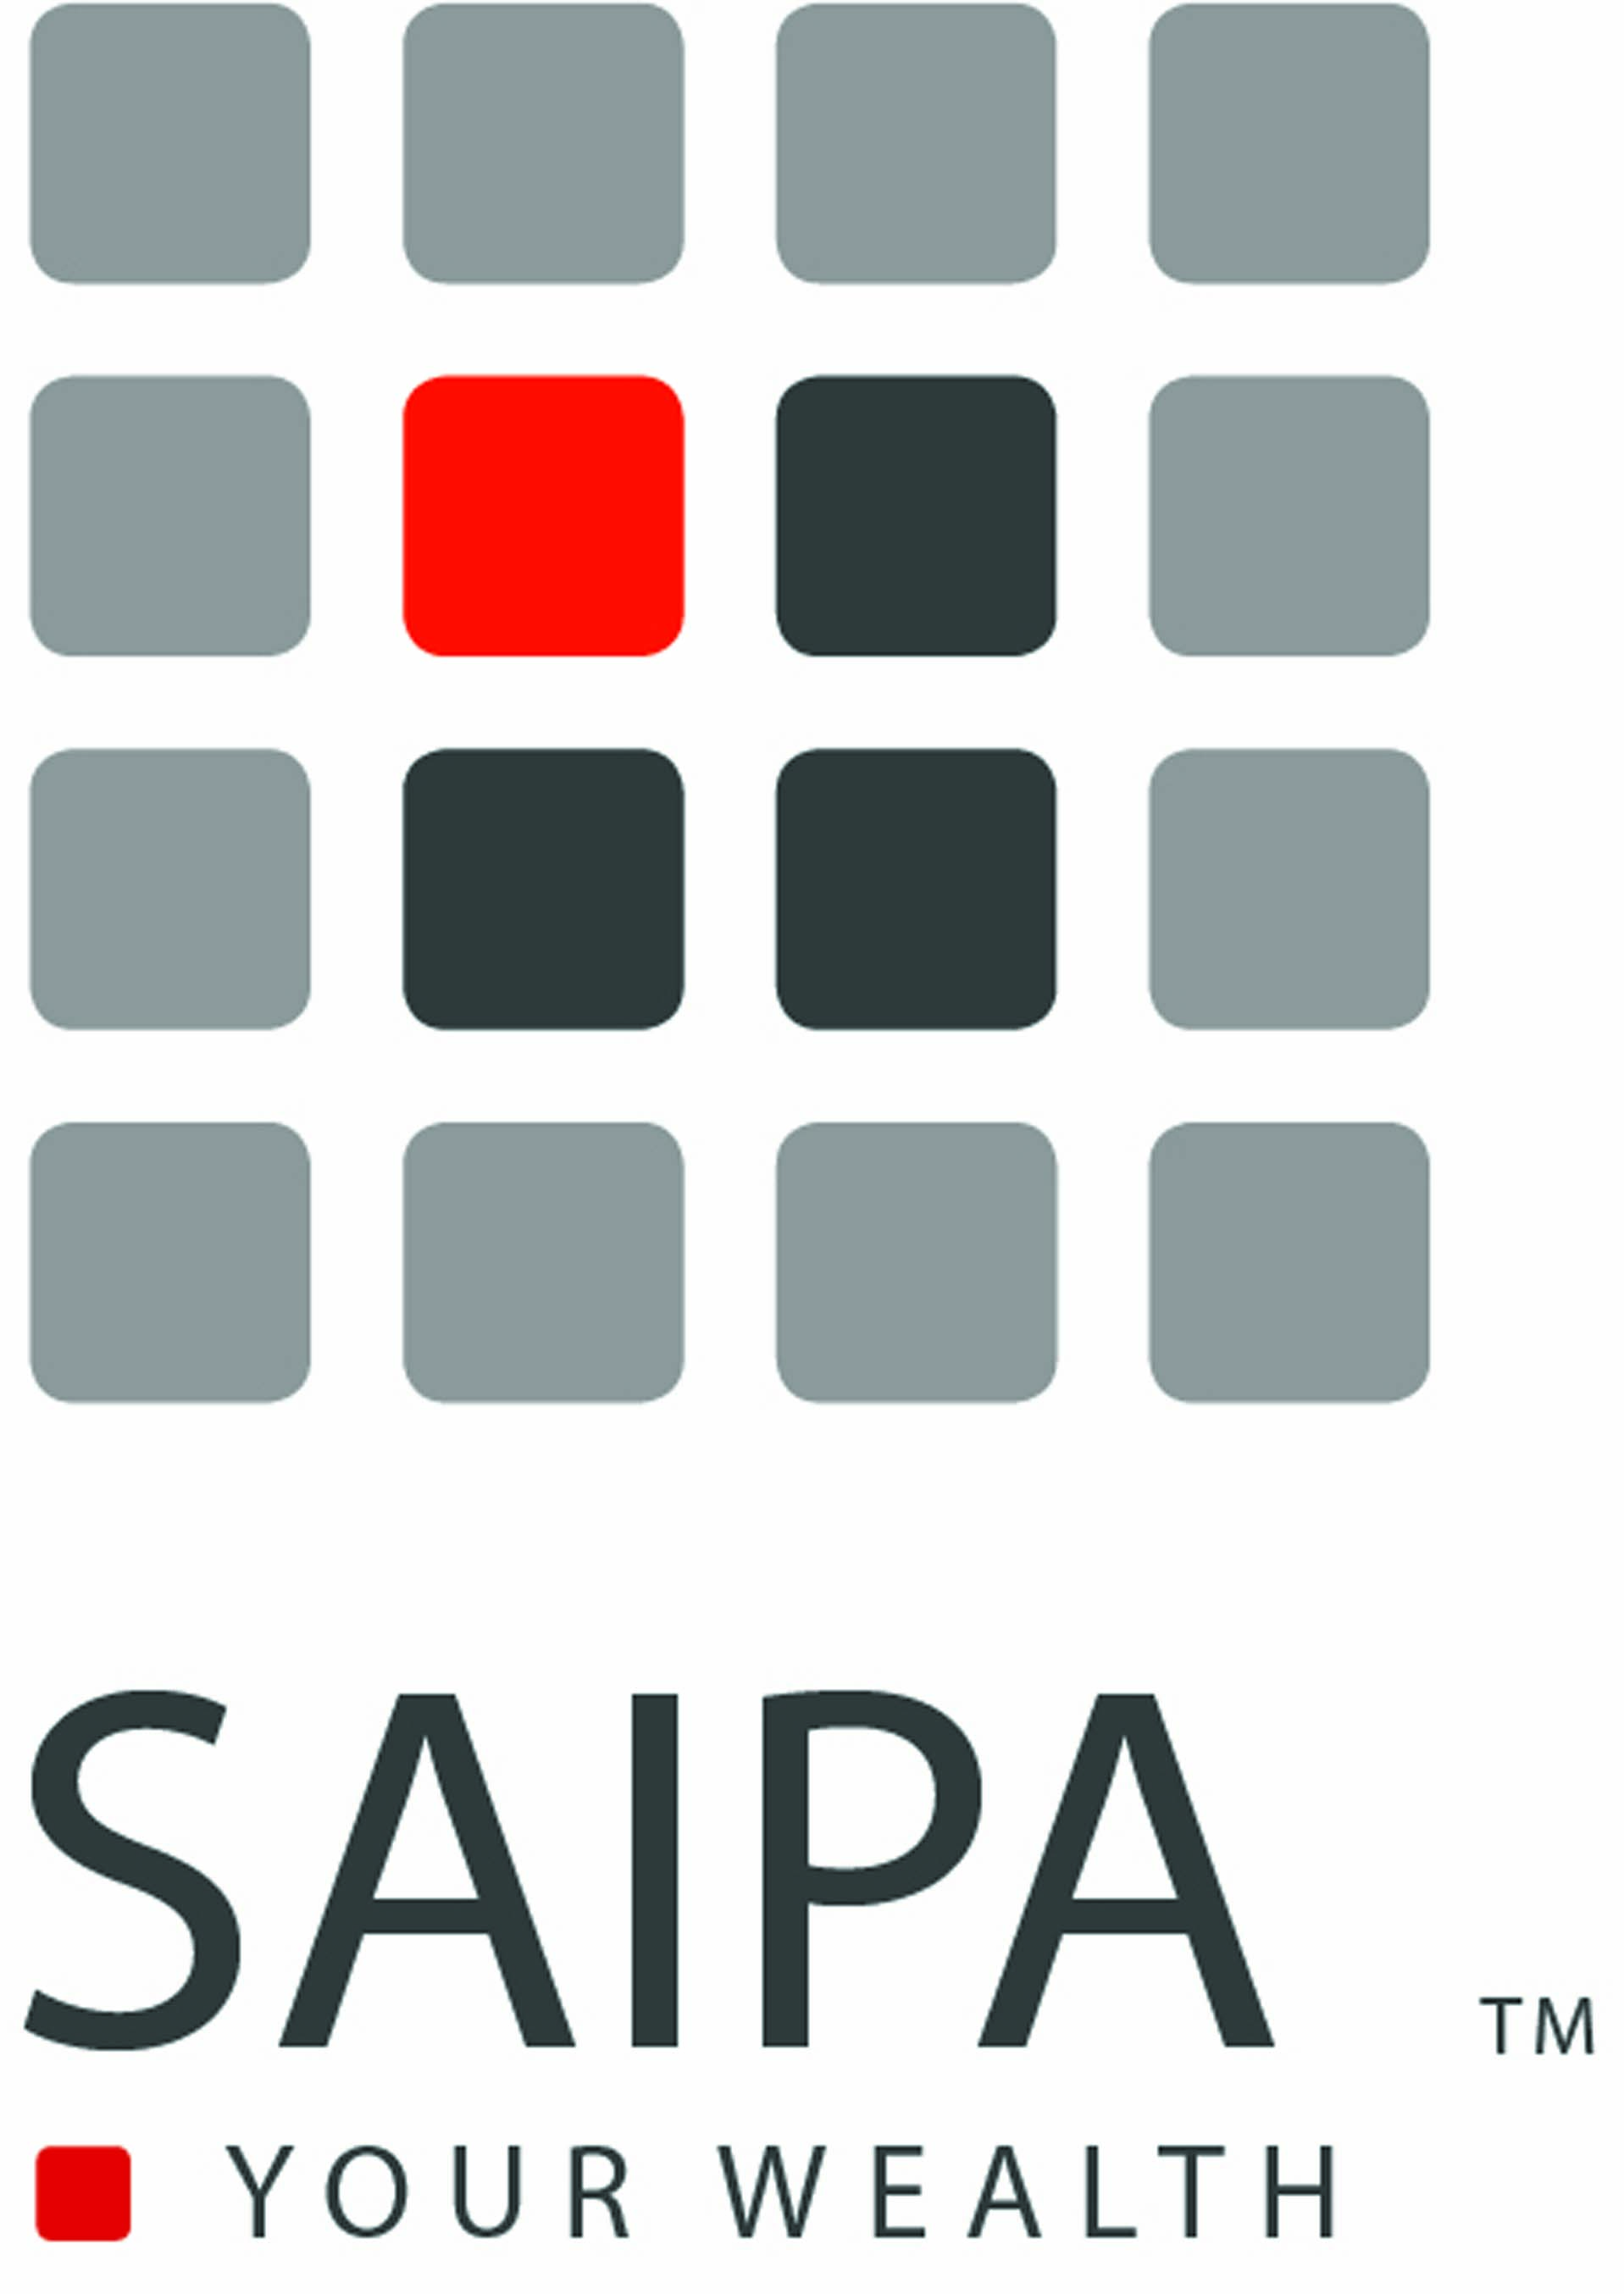 South African Institute of Professional Accountants logo